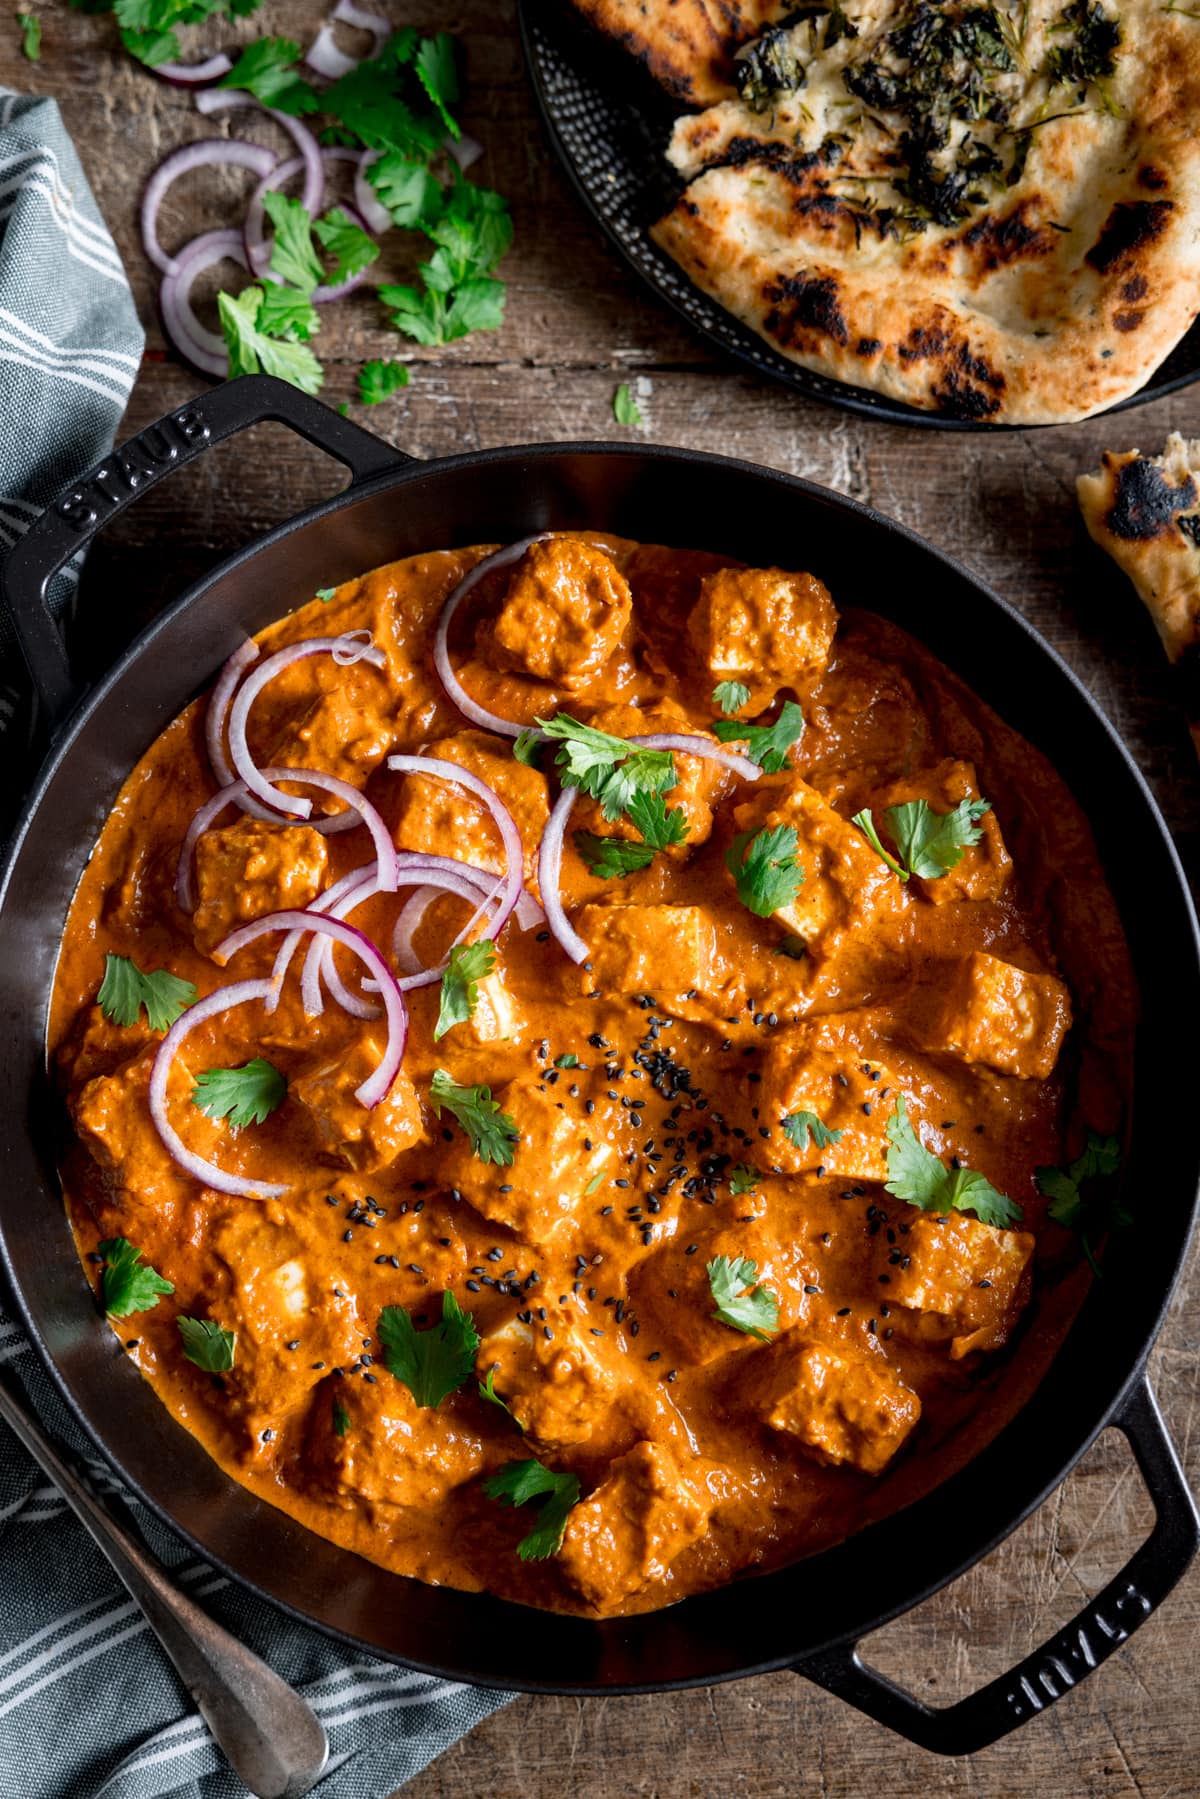 Picture of a paneer curry in black cast iron pan on a wooden board with some garlic naan bread in the background.